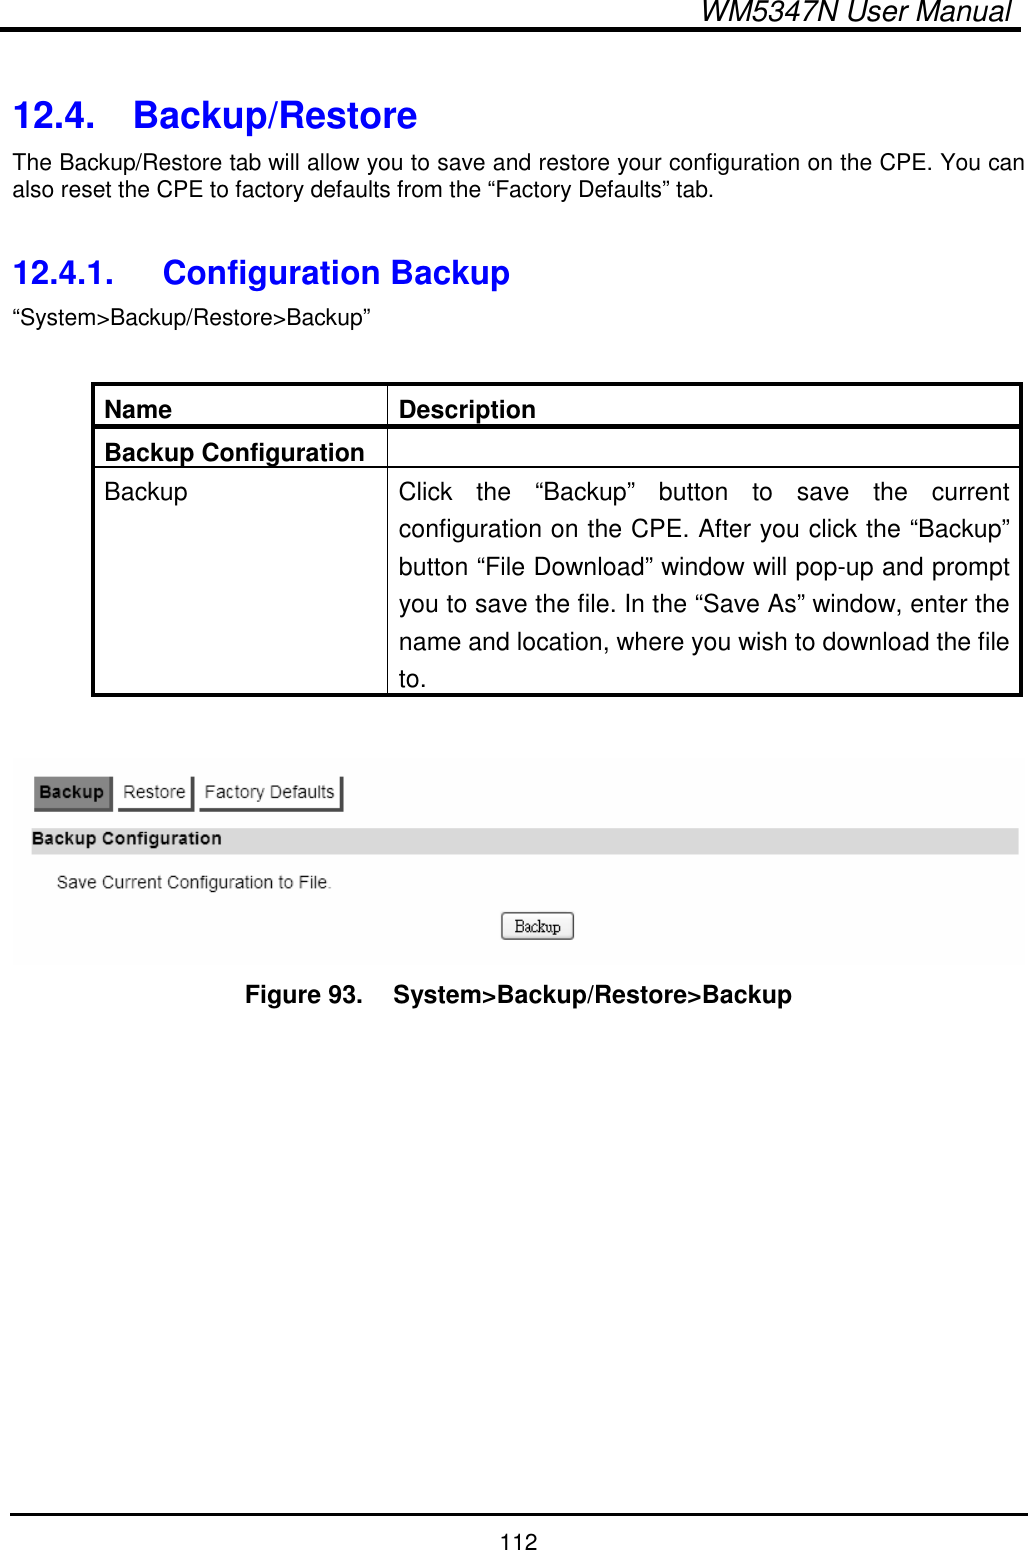  WM5347N User Manual  112  12.4.  Backup/Restore The Backup/Restore tab will allow you to save and restore your configuration on the CPE. You can also reset the CPE to factory defaults from the “Factory Defaults” tab.  12.4.1.  Configuration Backup “System&gt;Backup/Restore&gt;Backup”  Name  Description Backup Configuration   Backup  Click  the  “Backup”  button  to  save  the  current configuration on the CPE. After you click the “Backup” button “File Download” window will pop-up and prompt you to save the file. In the “Save As” window, enter the name and location, where you wish to download the file to.   Figure 93.   System&gt;Backup/Restore&gt;Backup  